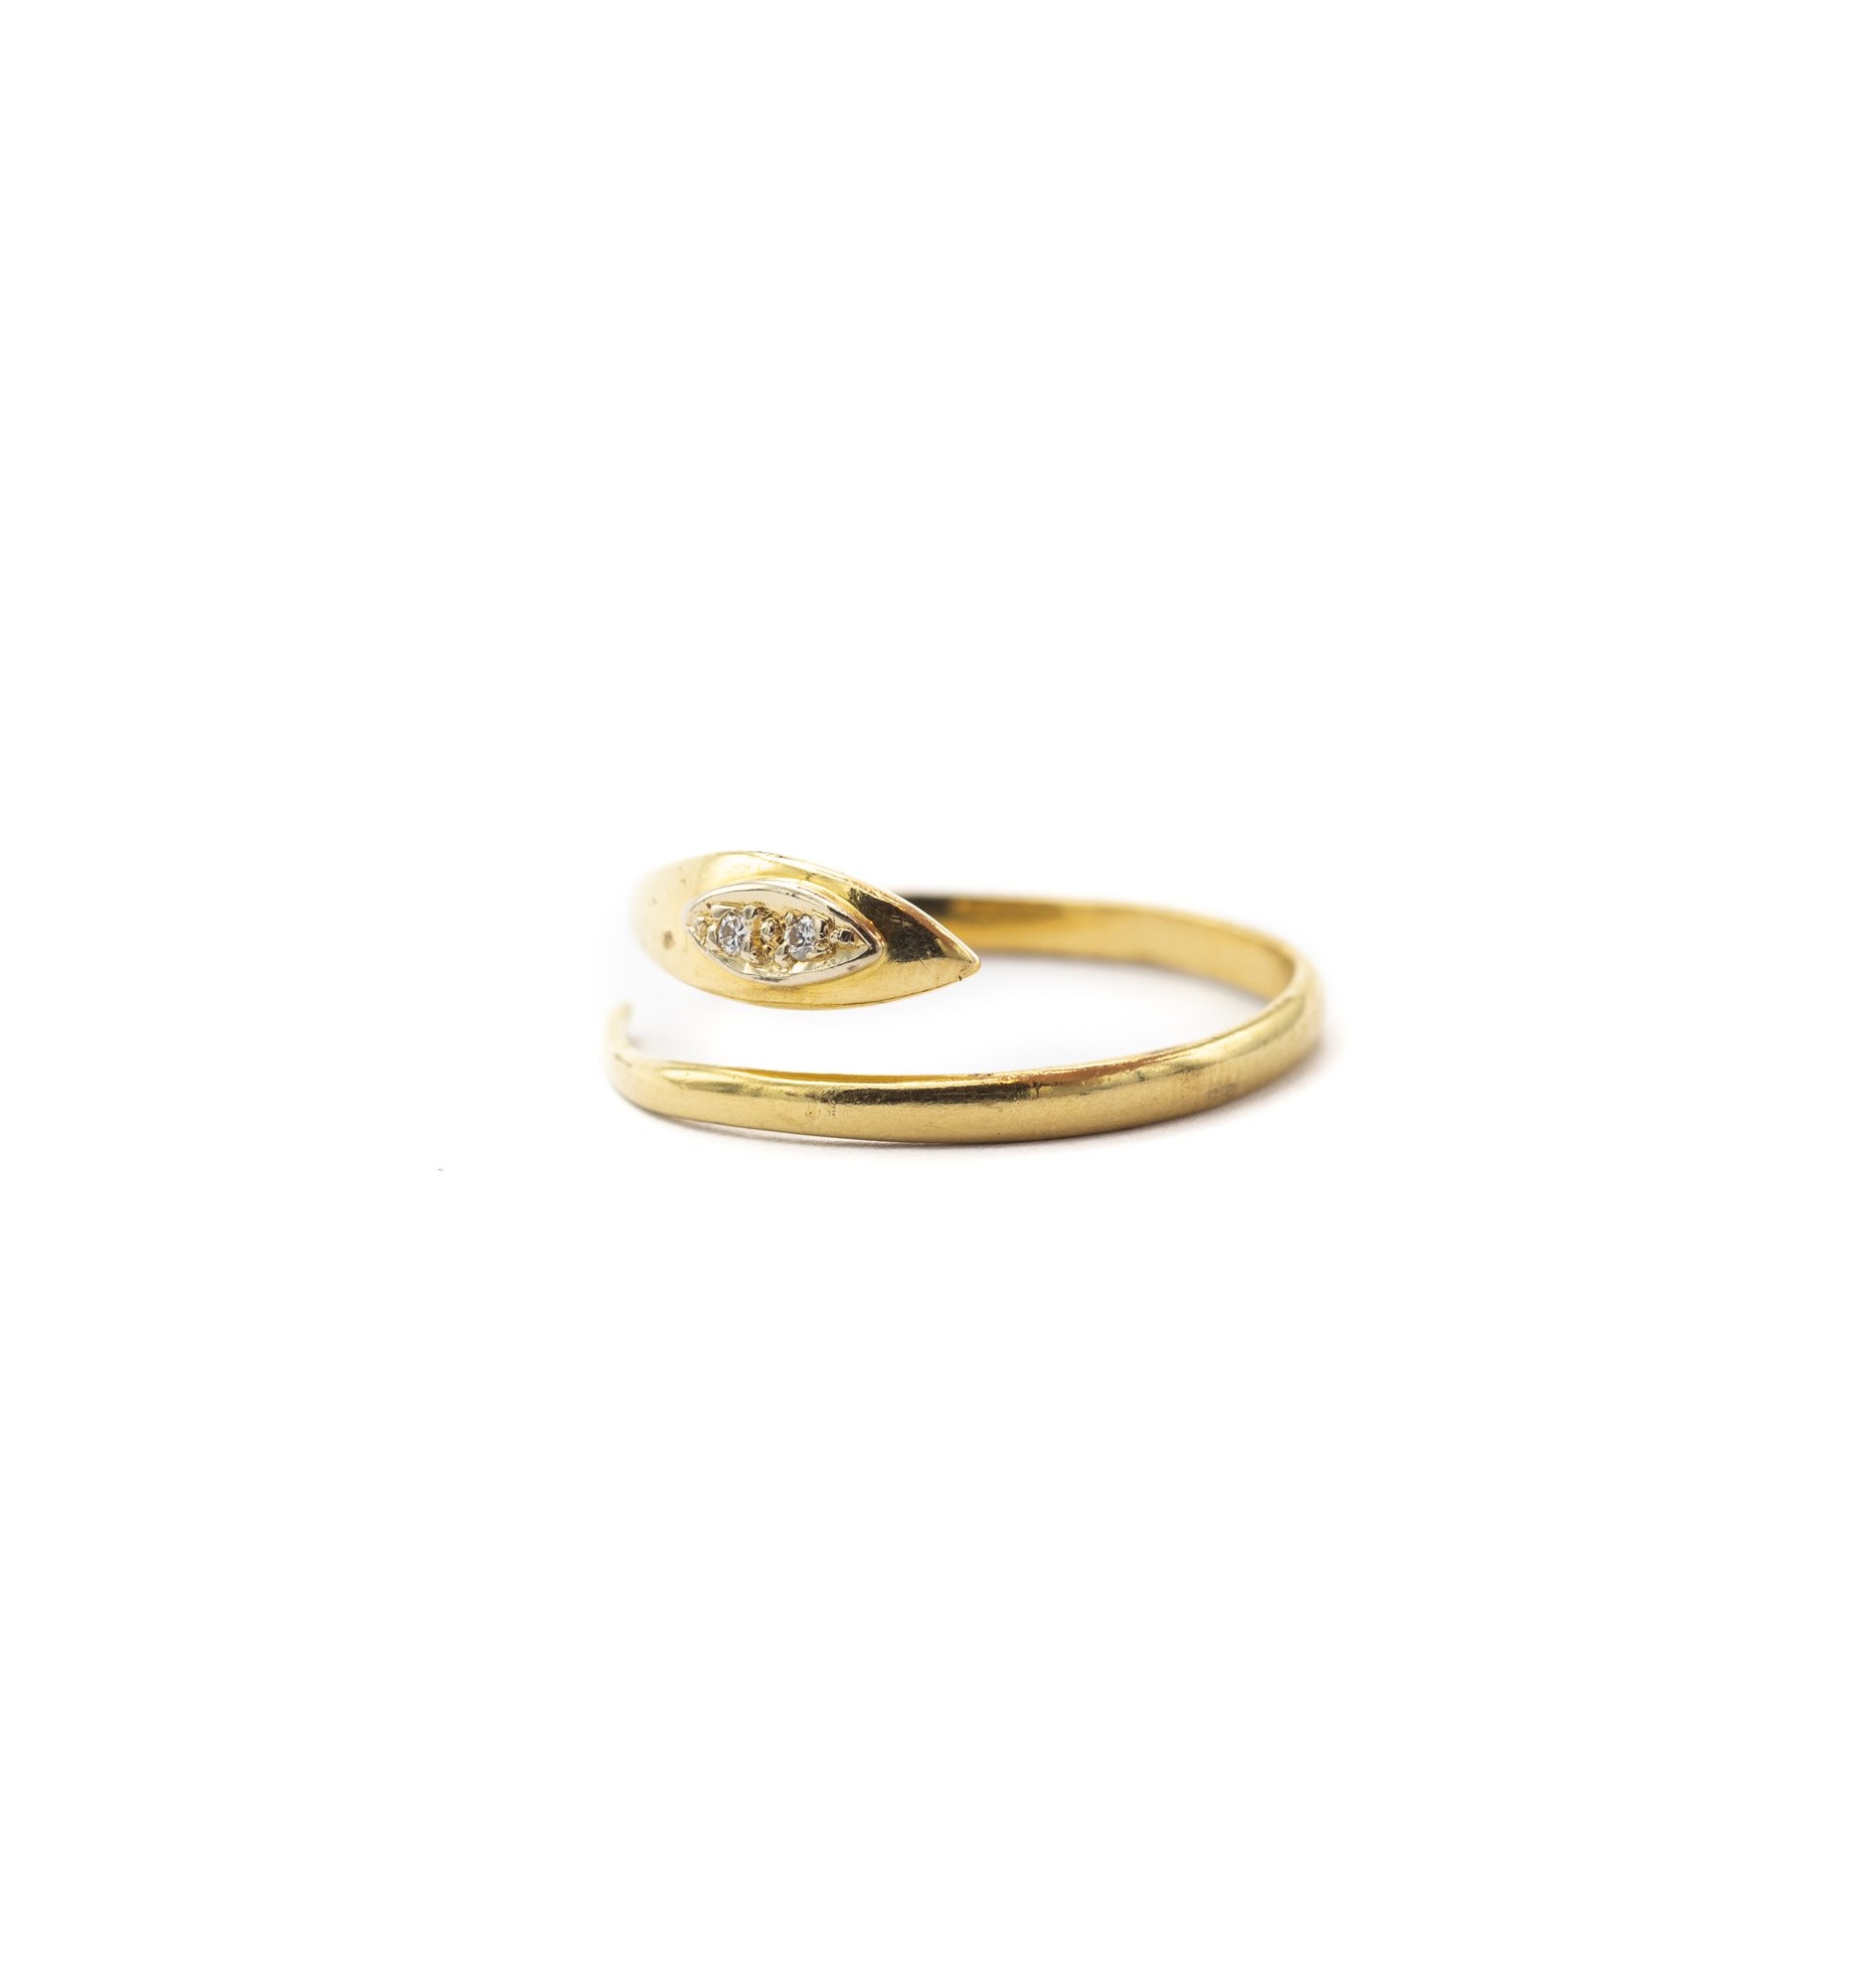 Snake Ring - 18 ct yellow gold Victorian symbol of eternal Love